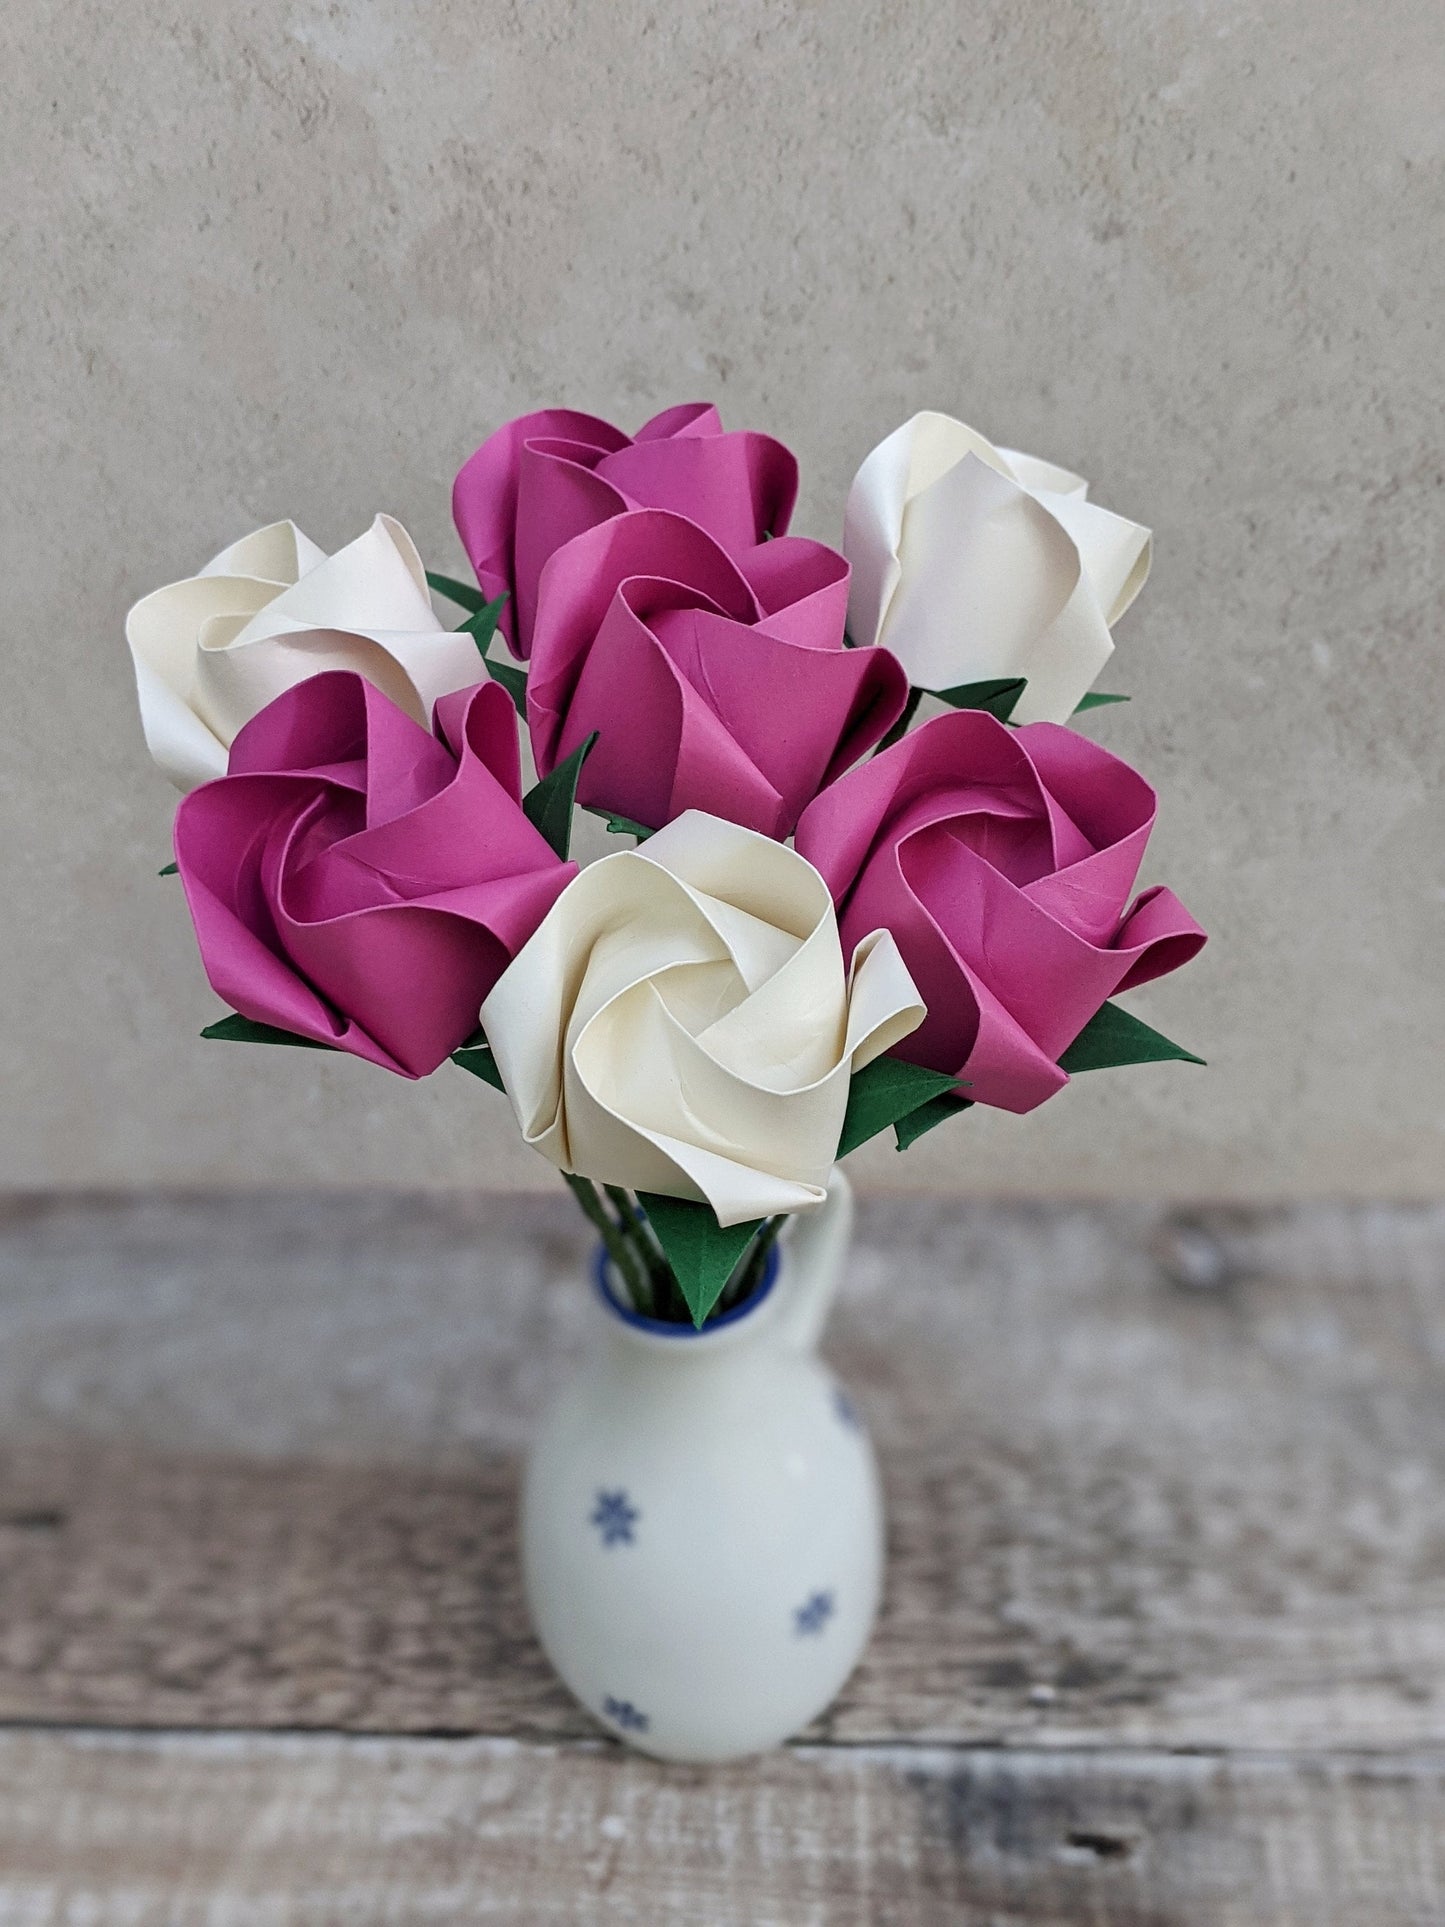 A bouquet of 7 origami roses in a small white vase. 4 roses are hot pink and 3 are ivory.